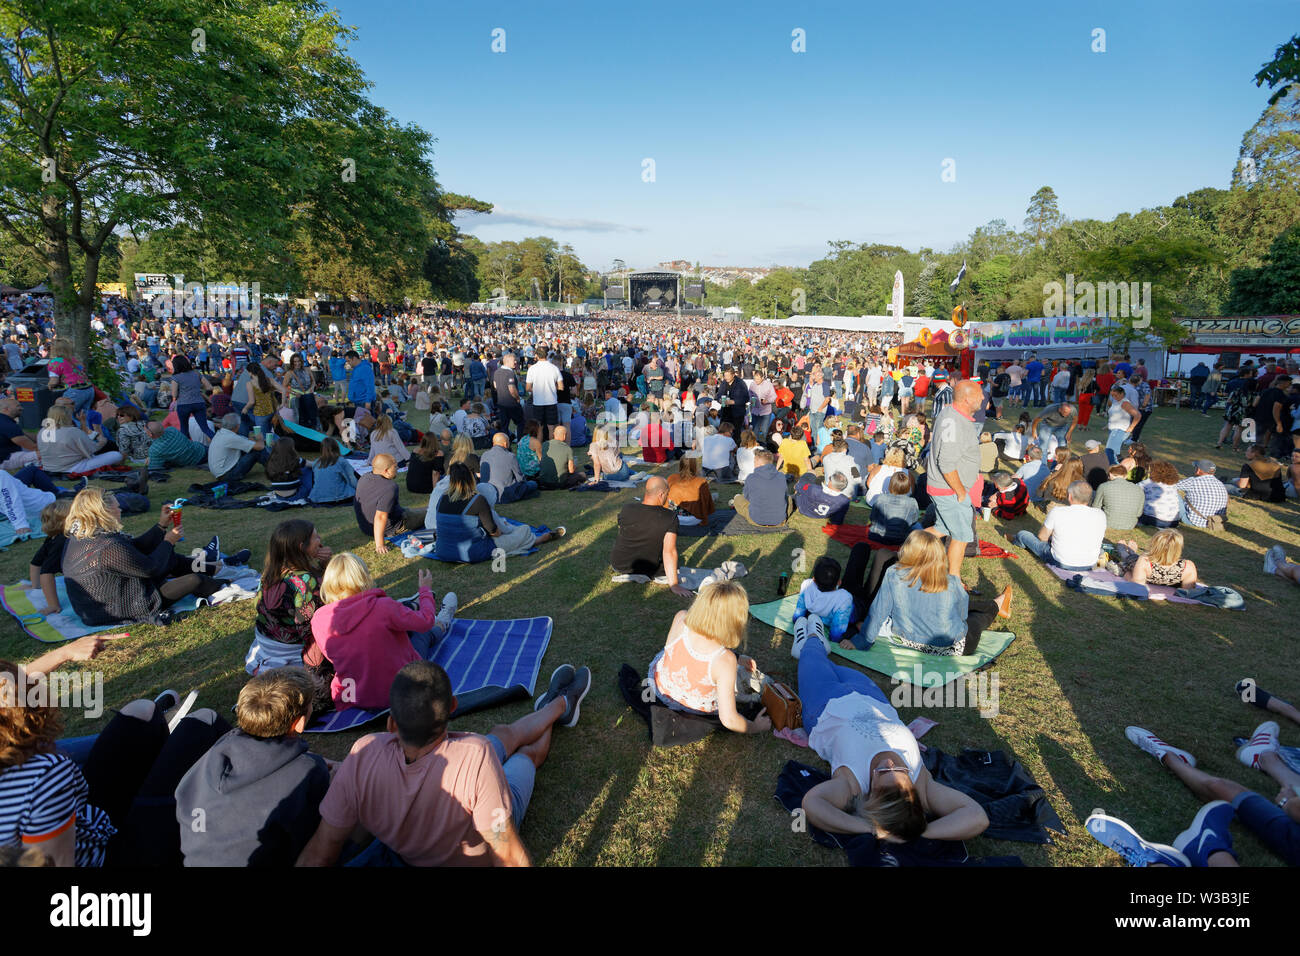 Swansea, UK. 13th July, 2019. General view of the venue. Re: Stereophonics live concert at the Singleton Park in Swansea, Wales, UK. Credit: ATHENA PICTURE AGENCY LTD/Alamy Live News Stock Photo